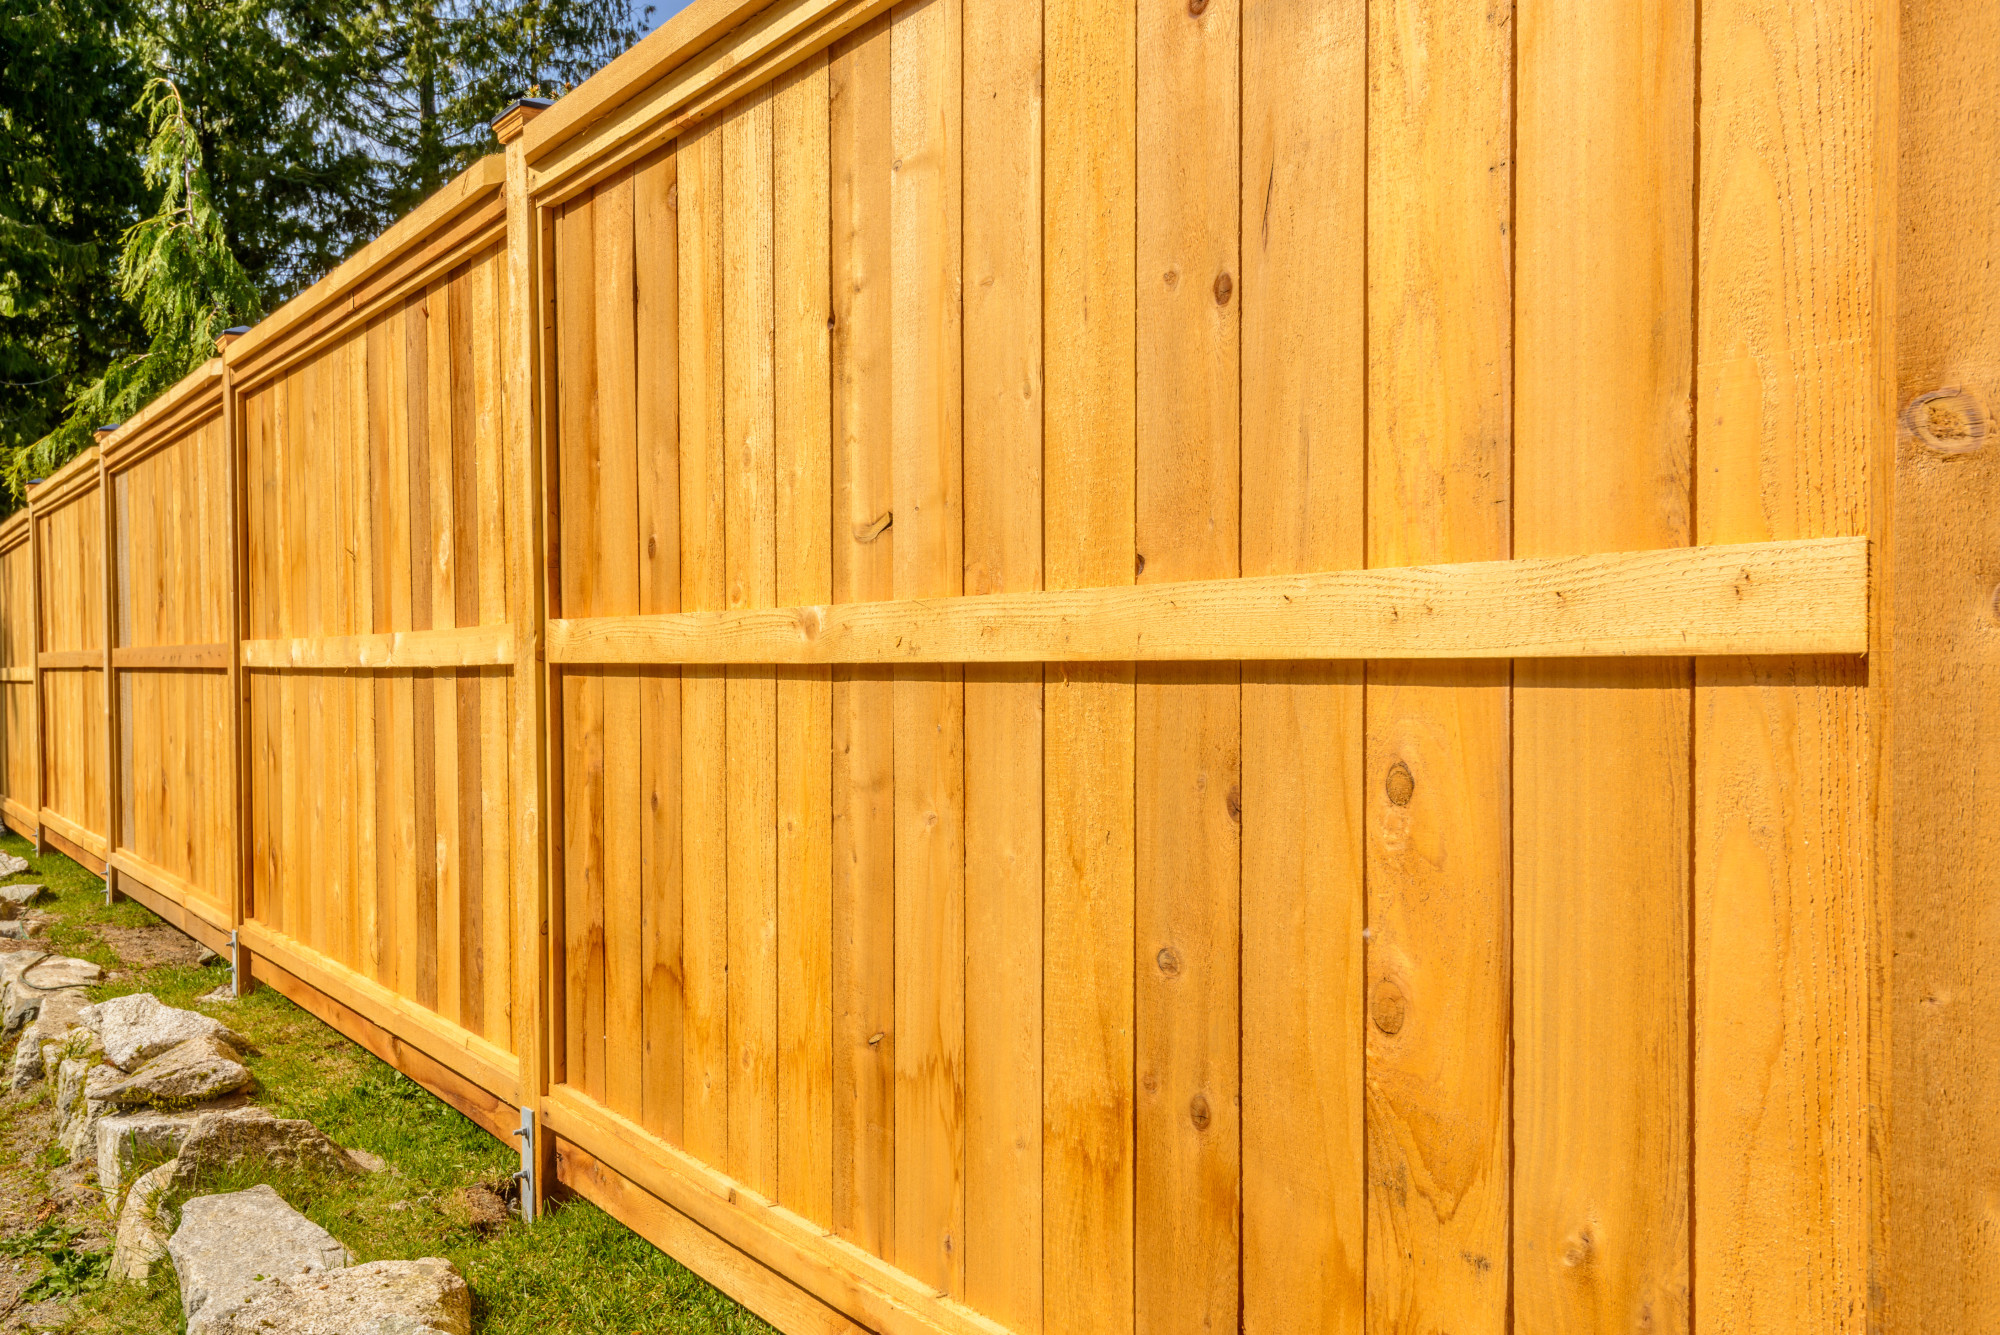 When it comes to adding security, privacy, and enhancing the aesthetic of your backyard, explore the benefits of a wood privacy fence.